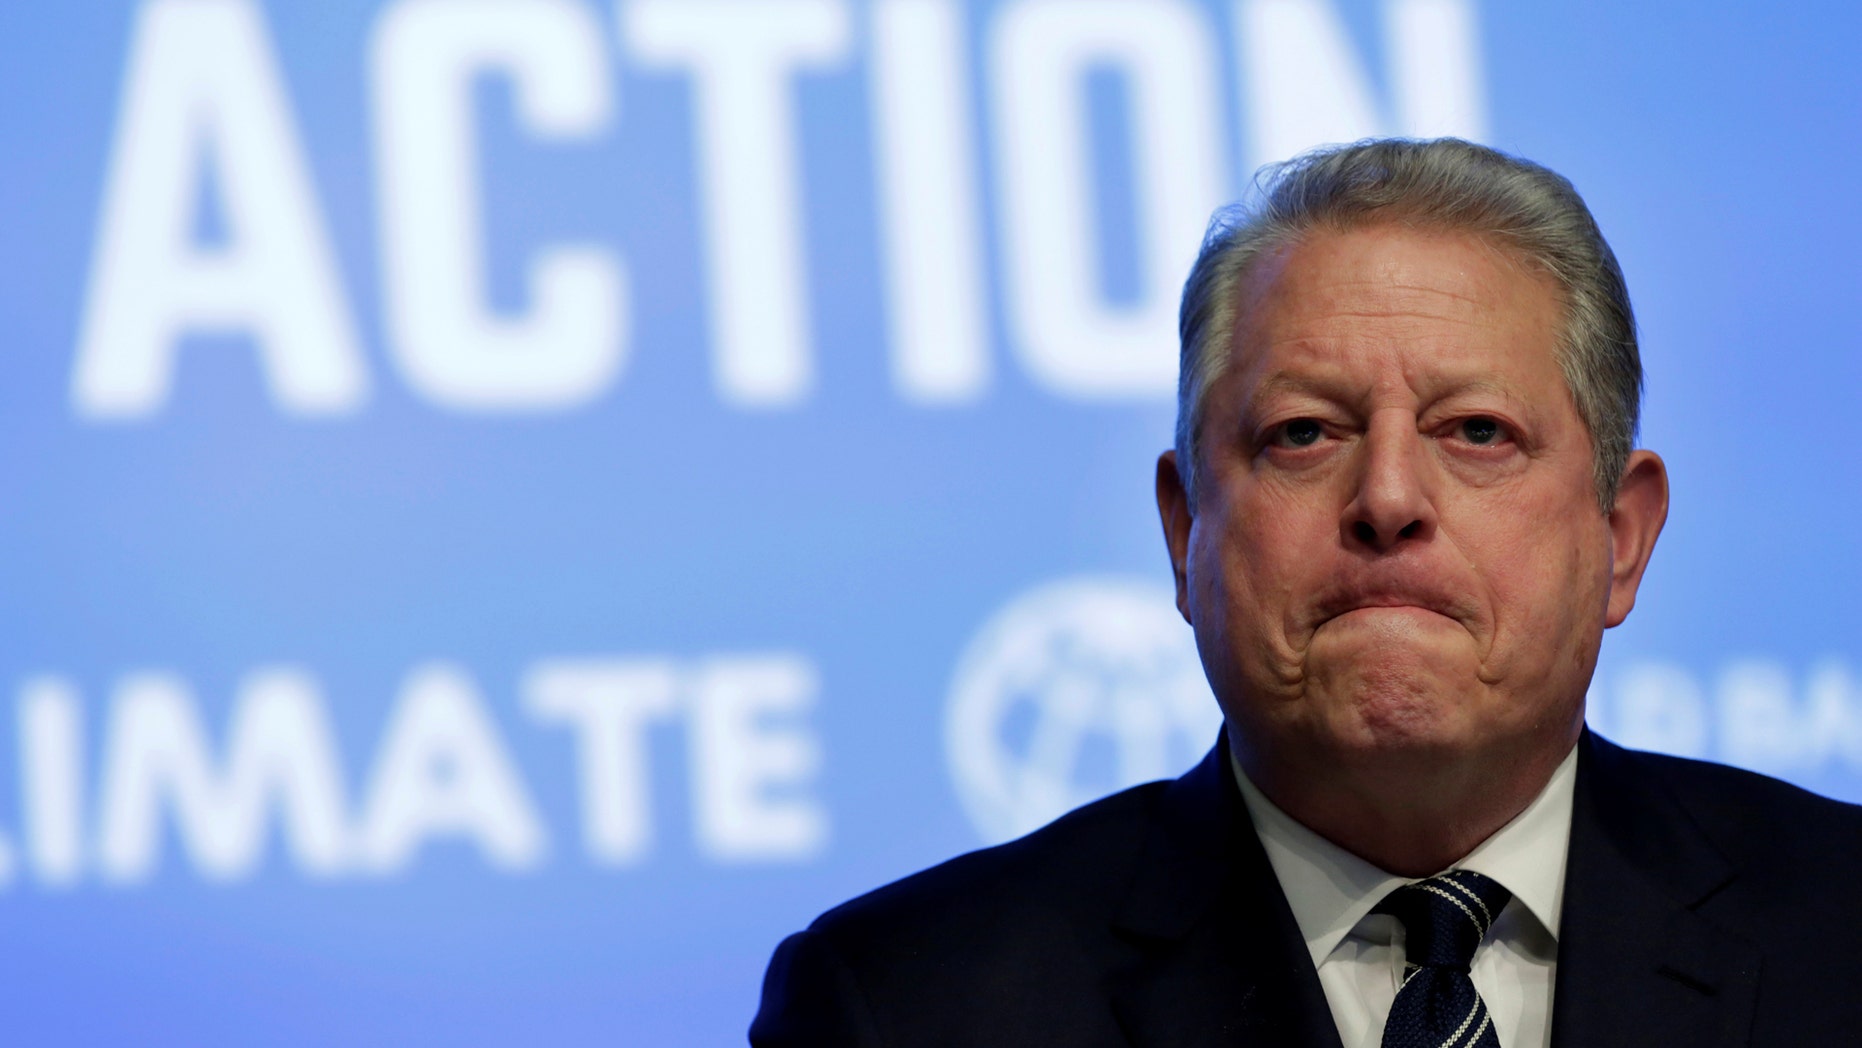 File photo - Former U.S. Vice President Al Gore attends Unlocking Financing for Climate Action session during the IMF/World Bank spring meetings in Washington, U.S., April 21, 2017. (REUTERS/Yuri Gripas)